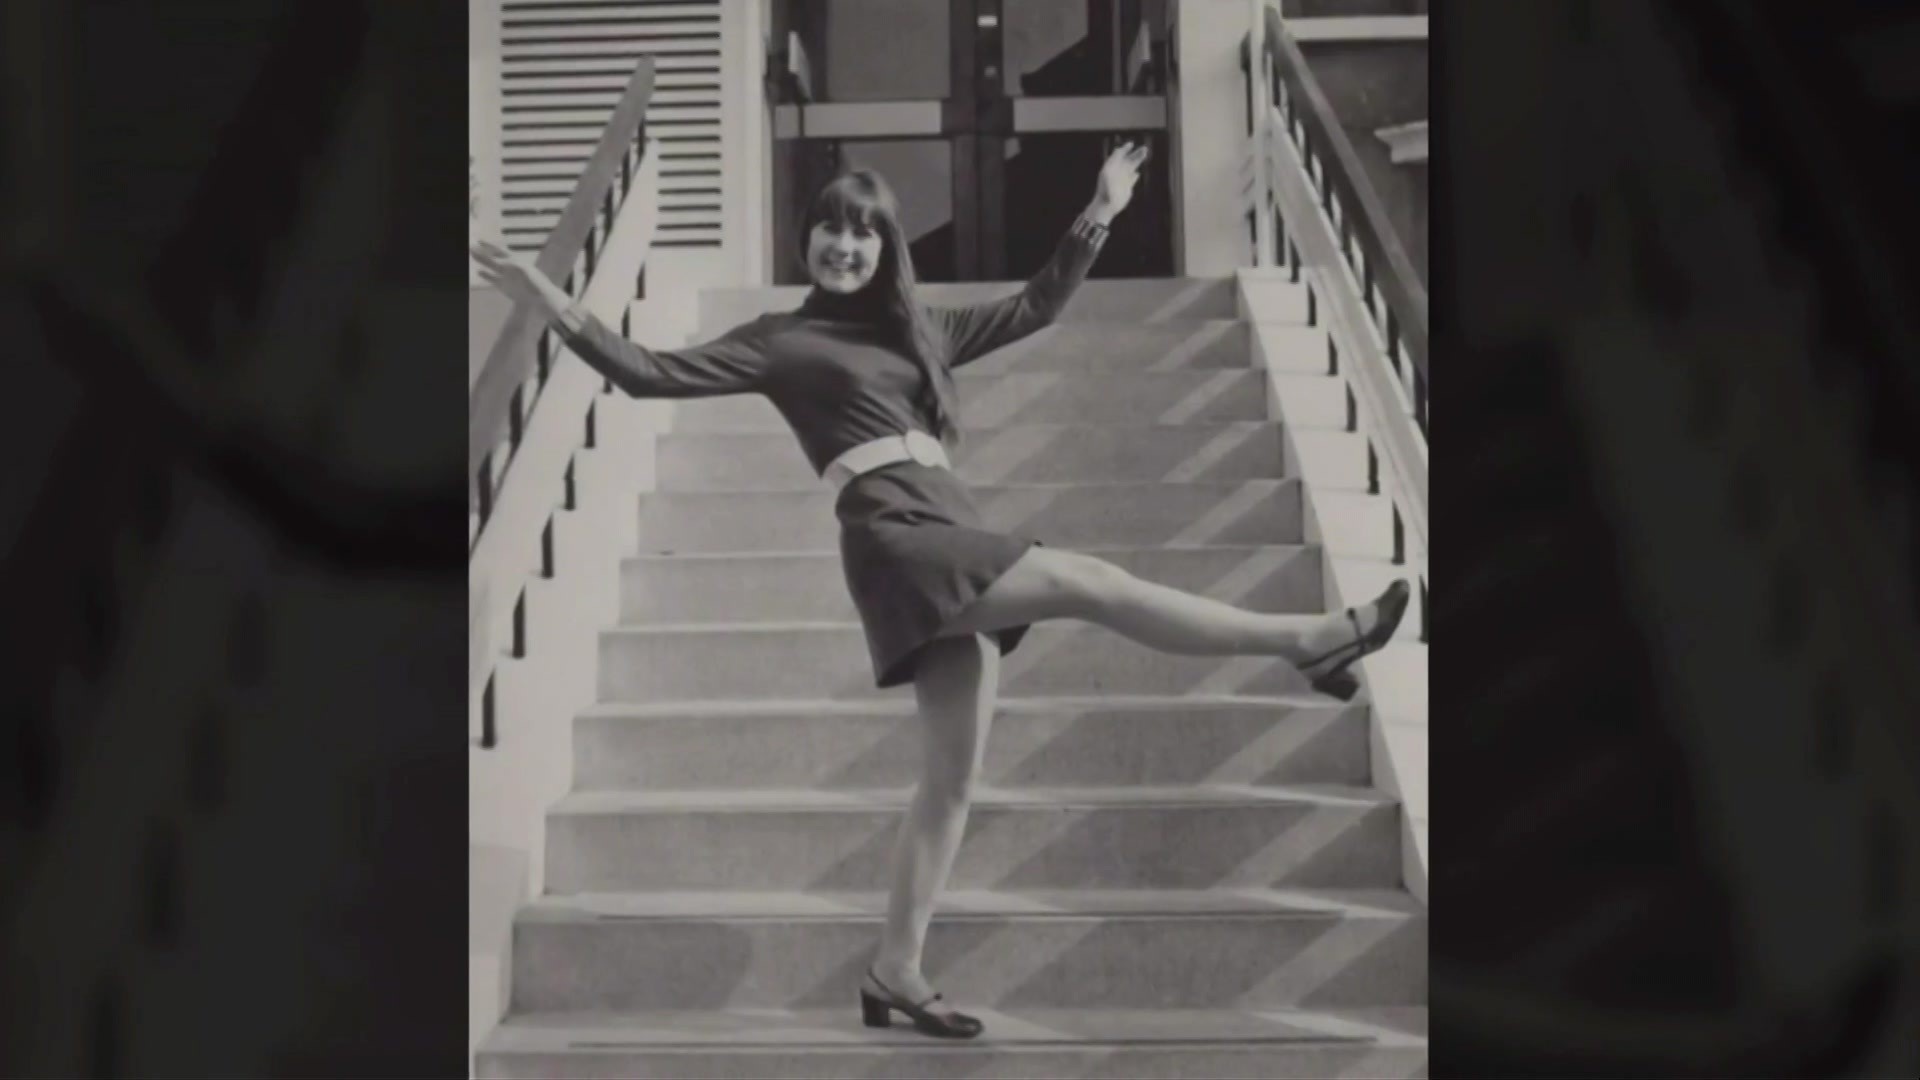 Judith Durham smiles and stands on some stairs.